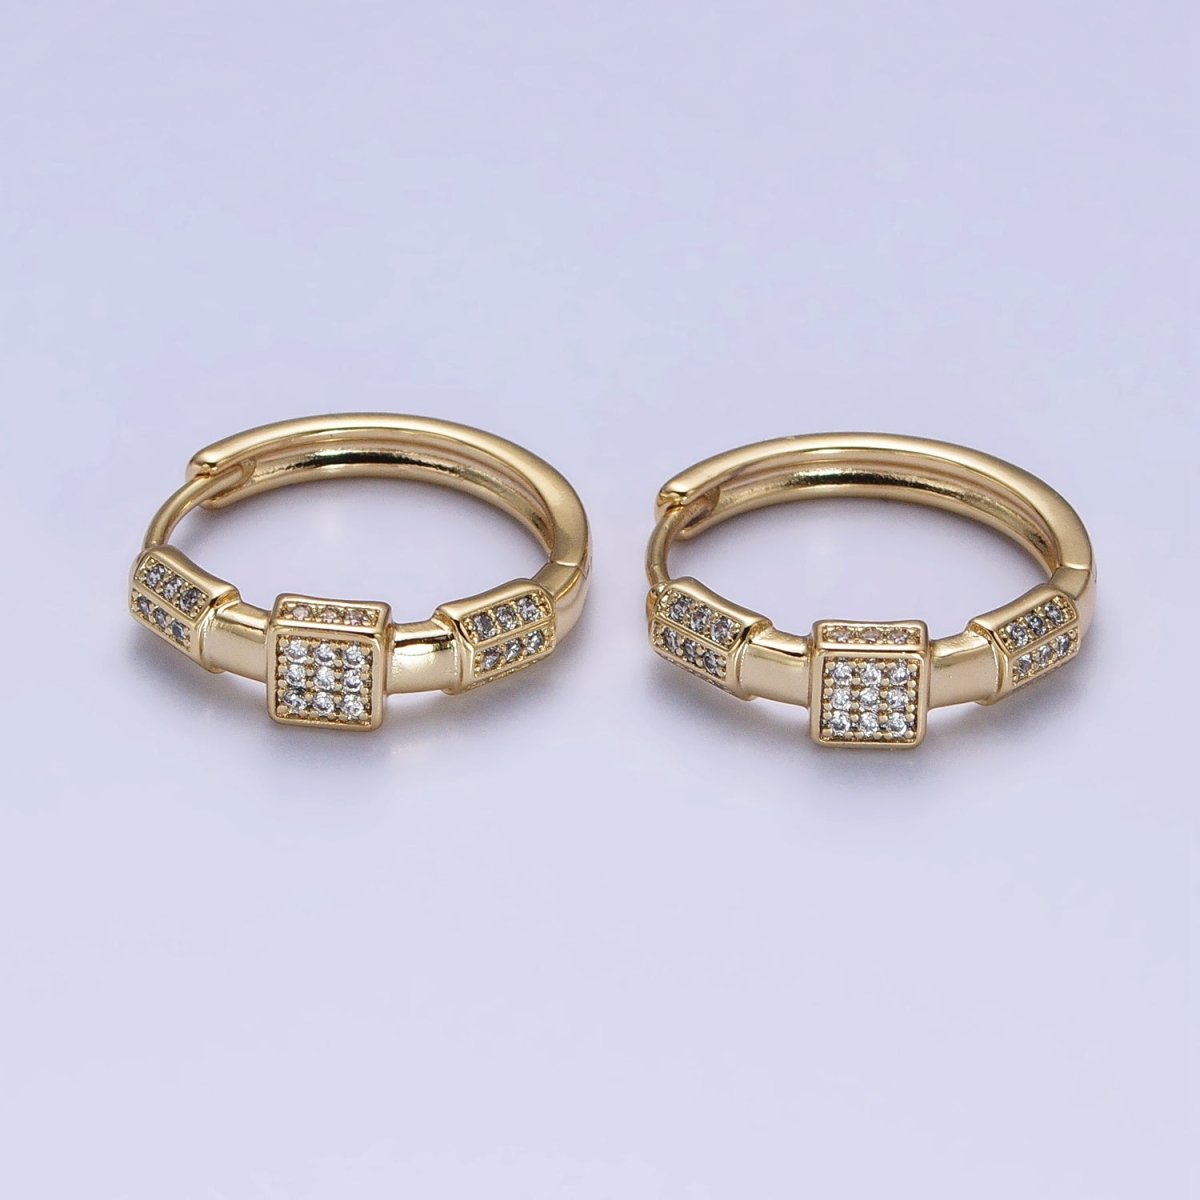 24K Gold Filled Clear Micro Paved Geometric Square Edged Bar 20mm Hoop Earrings | AB311 - DLUXCA